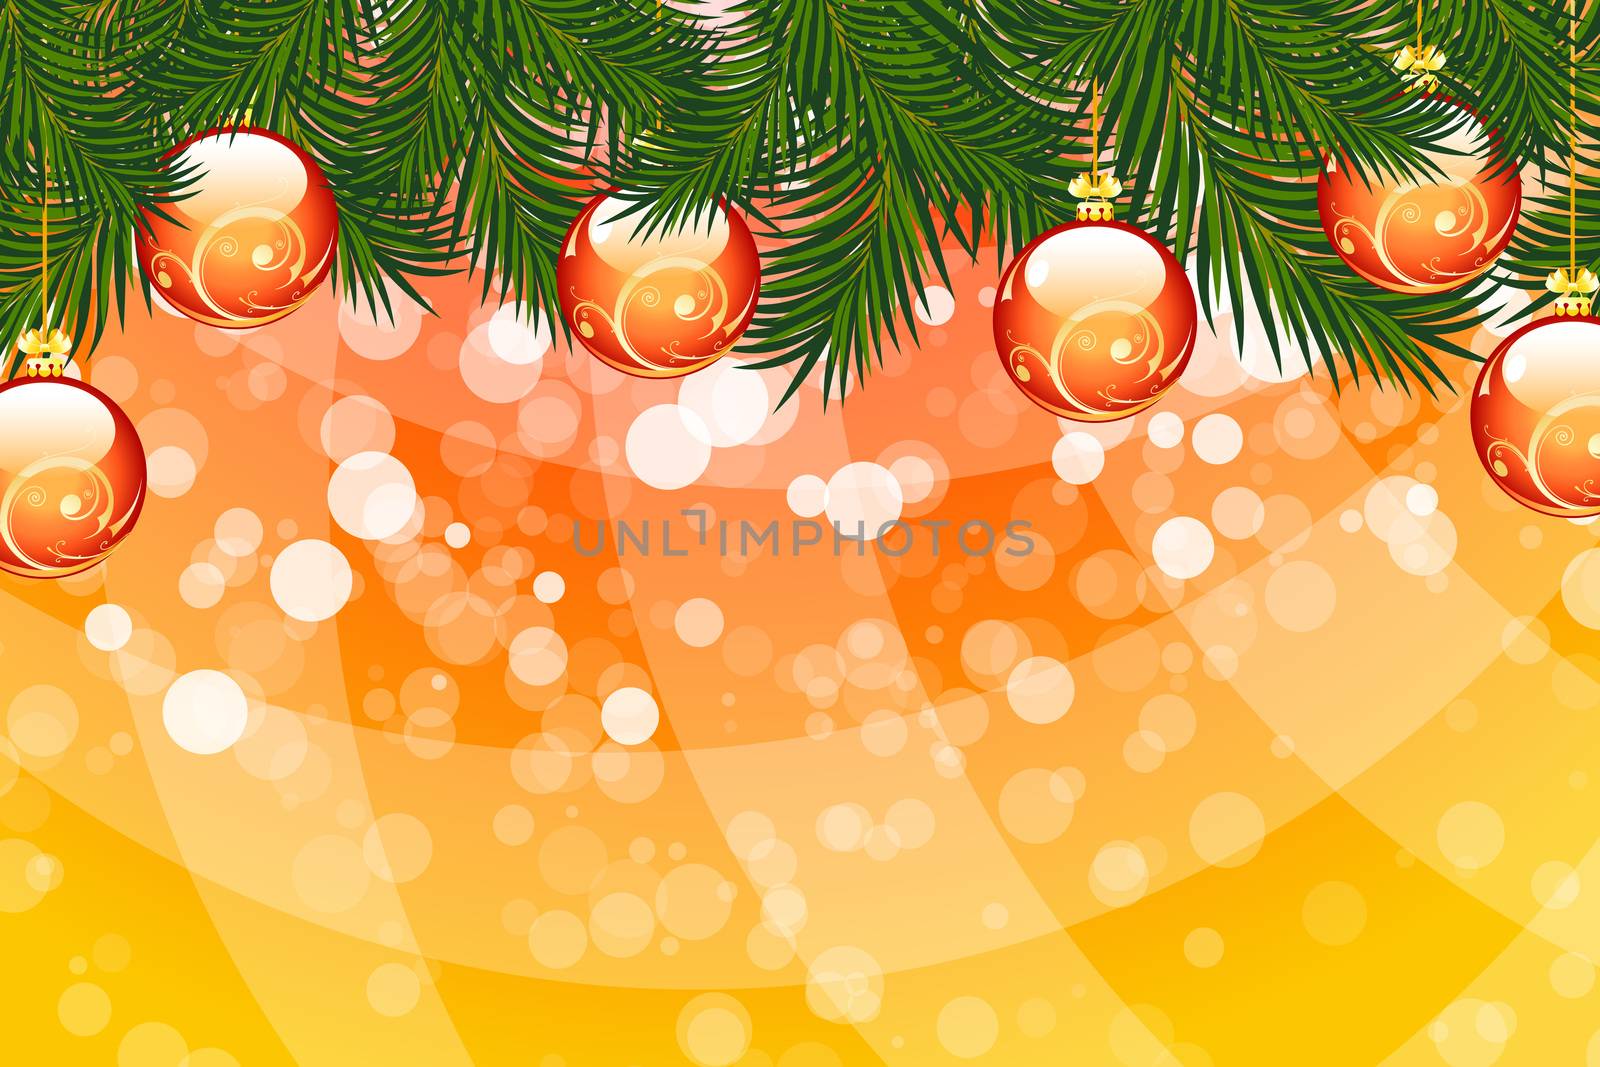 Illustration of christmas fir tree with baubles and sparkles on abstract background